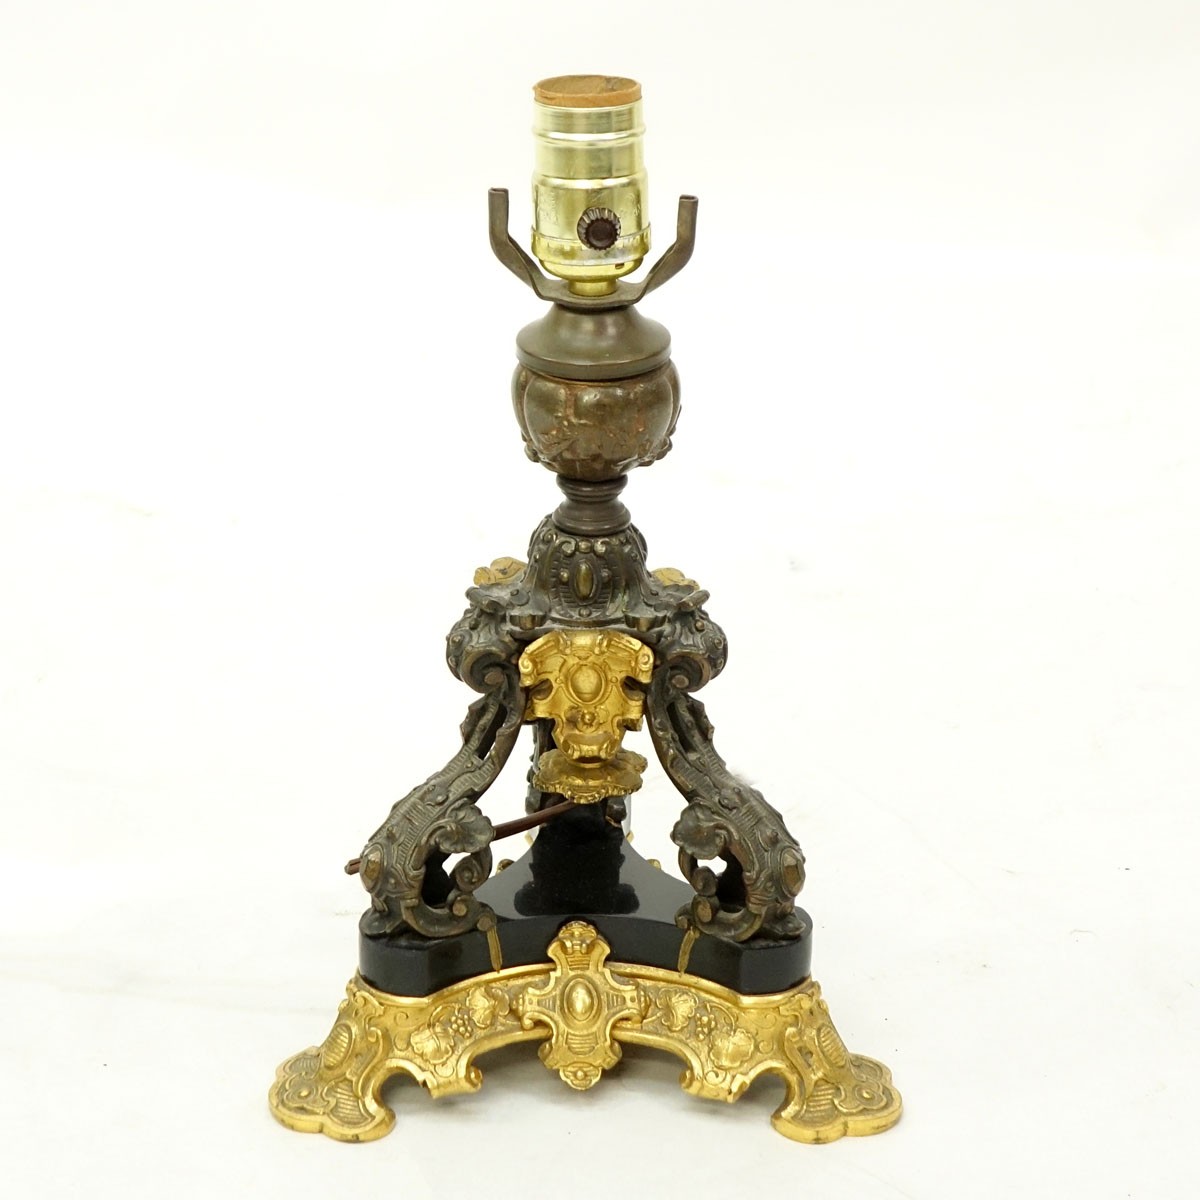 20th Century French Empire Style Gilt and Patinated Bronze Lamp with Marble Insert. Rubbing to bronze, restorations to marble.